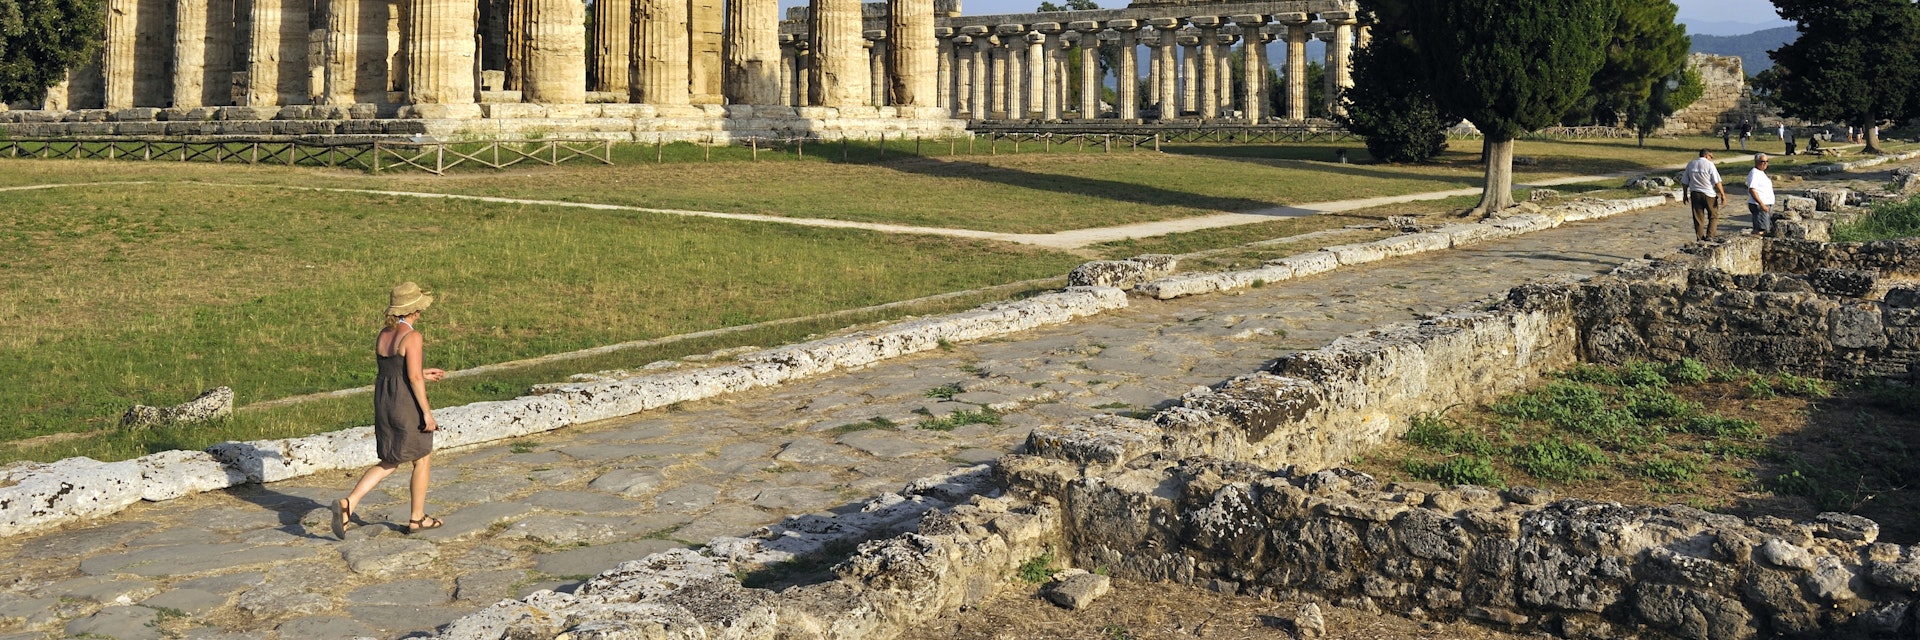 Italy, Campania, National Park of Cilento and Vallo di Diano, listed as World Heritage by UNESCO, archeological site of Paestum, Neptune temple and basilica